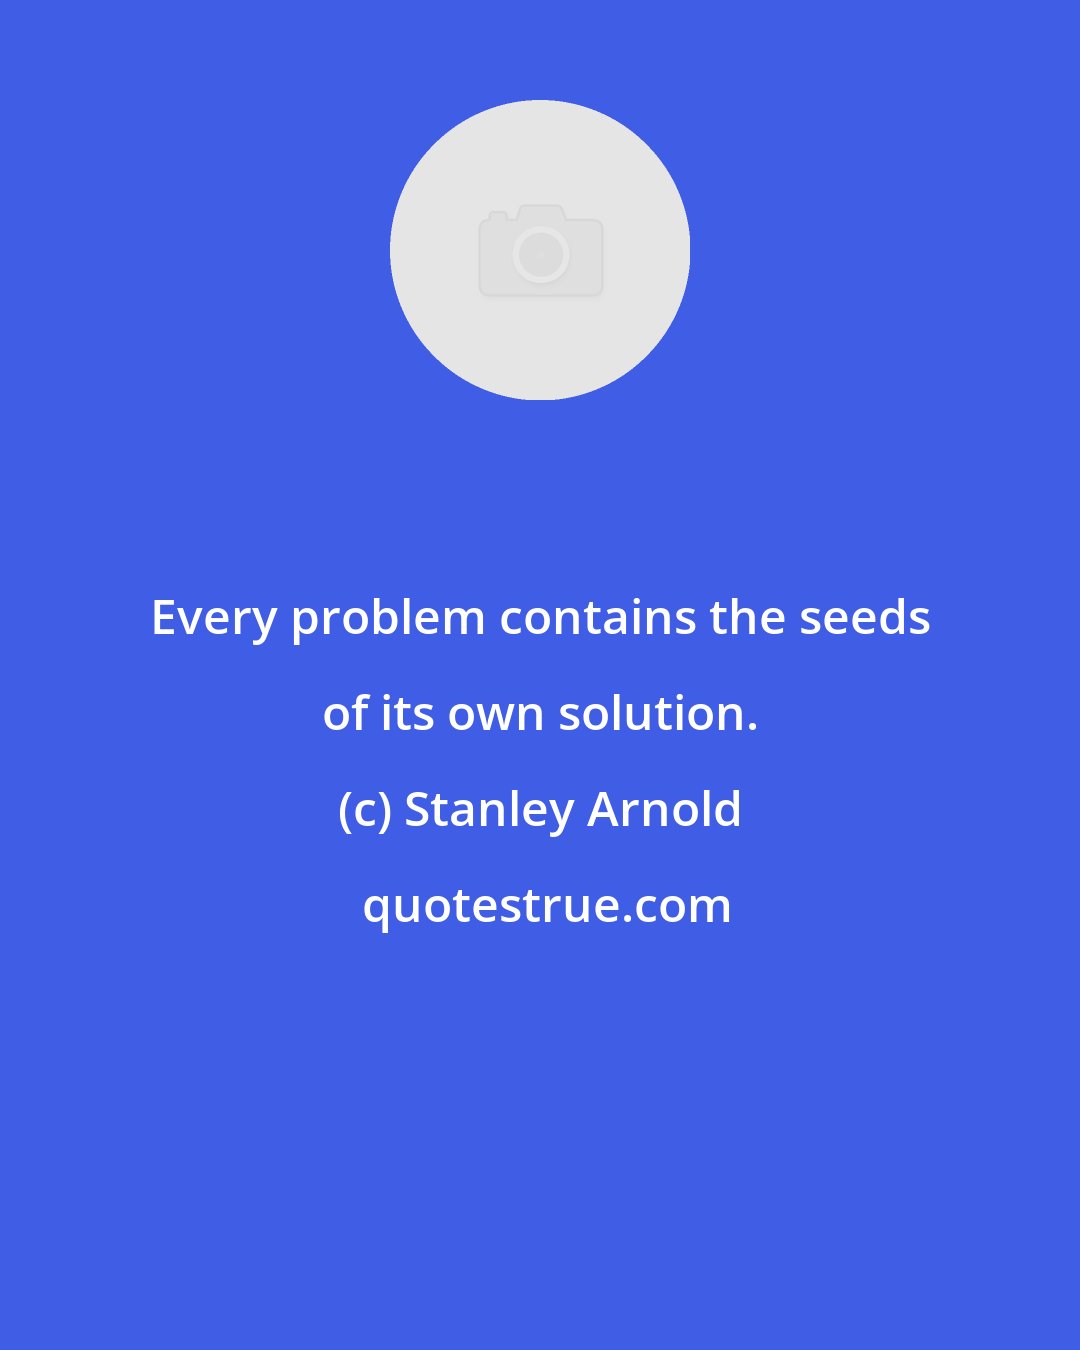 Stanley Arnold: Every problem contains the seeds of its own solution.